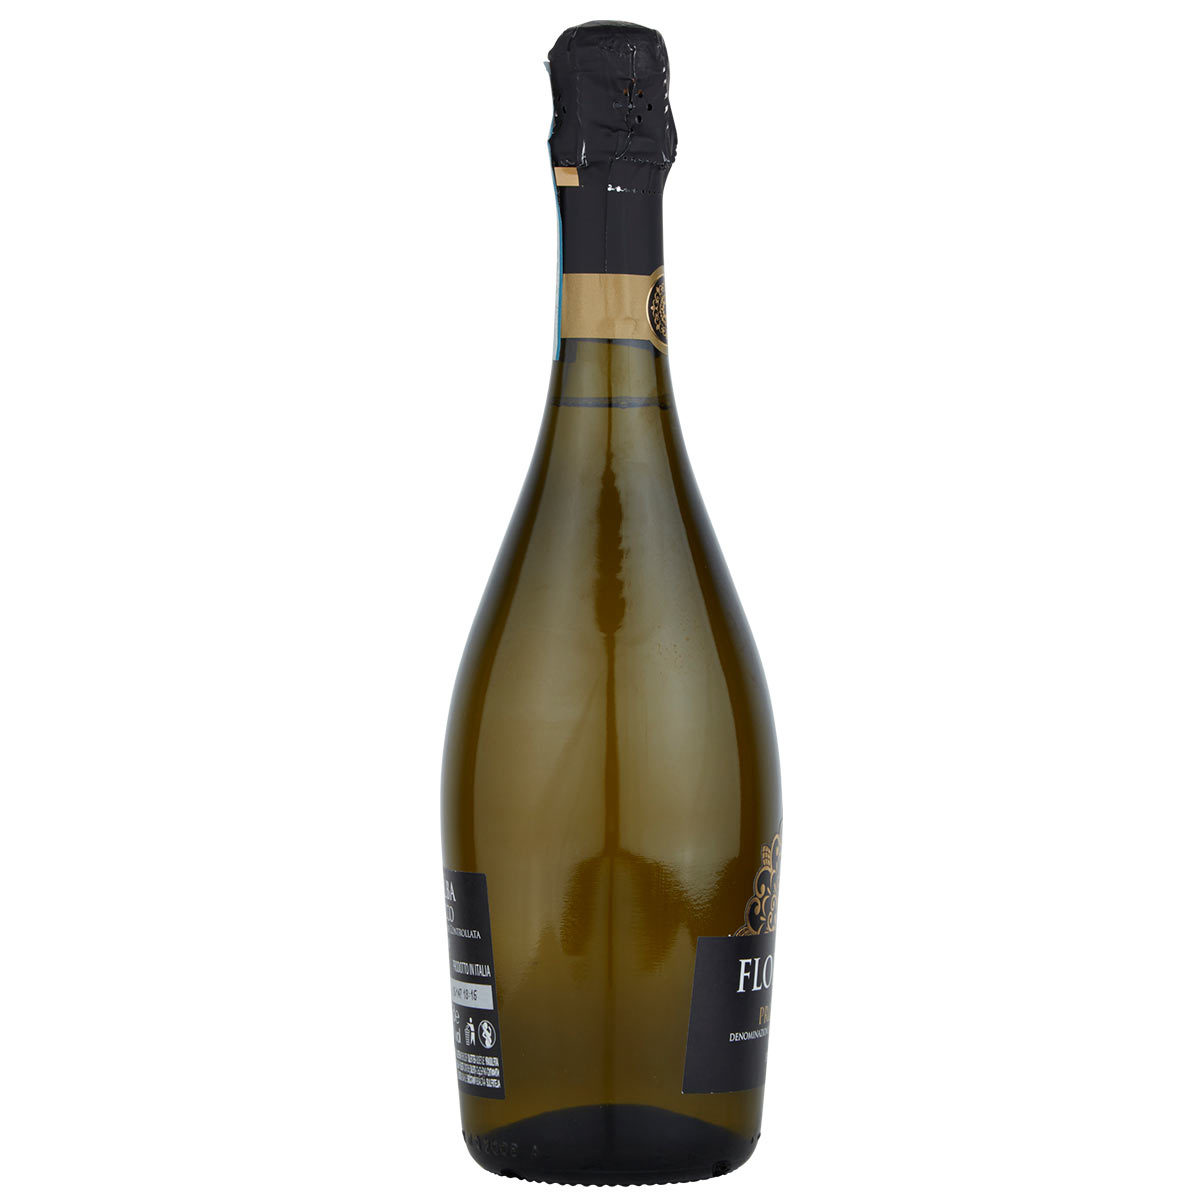 Floralba Prosecco Extra Dry DOC, 6 x 75cl